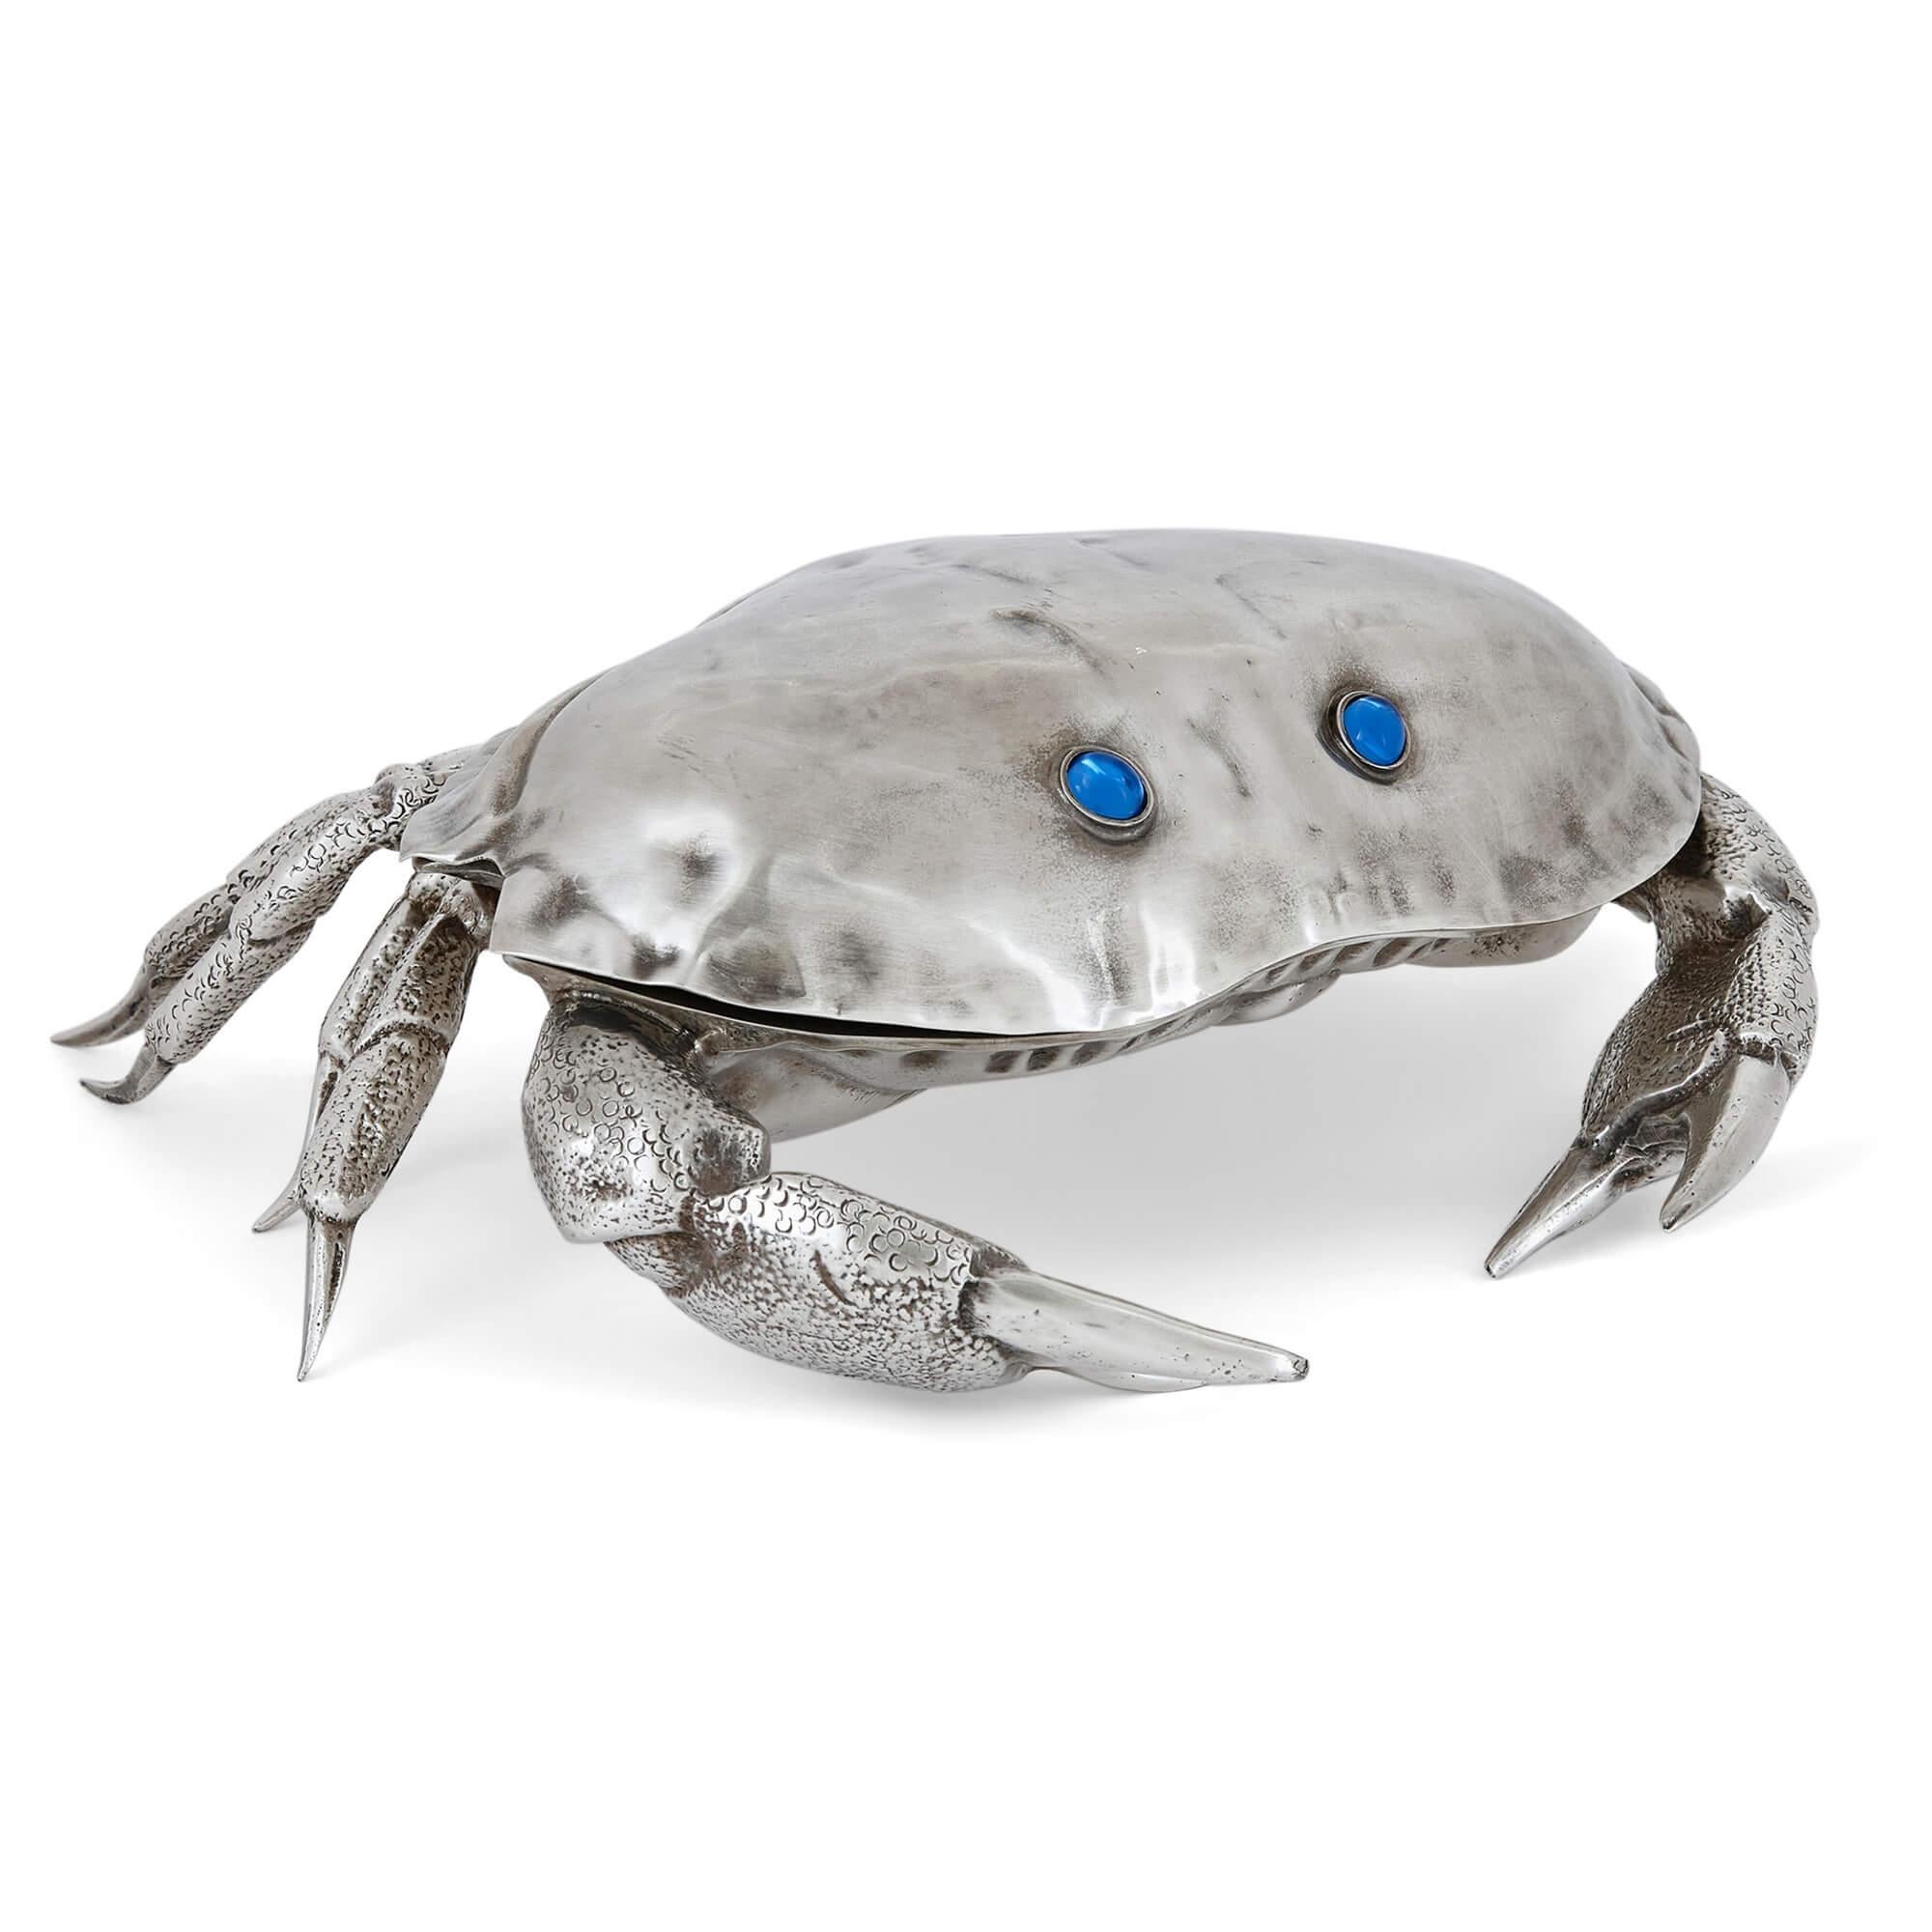 Italian silver-plated crab-form caviar dish attributed to Franco Lapini
Italian, c. 1970
Height 9cm, width 26cm, depth 24cm

This sensational caviar dish takes the form of a large crab, and is a wonderfully quirky collector’s item. Expert